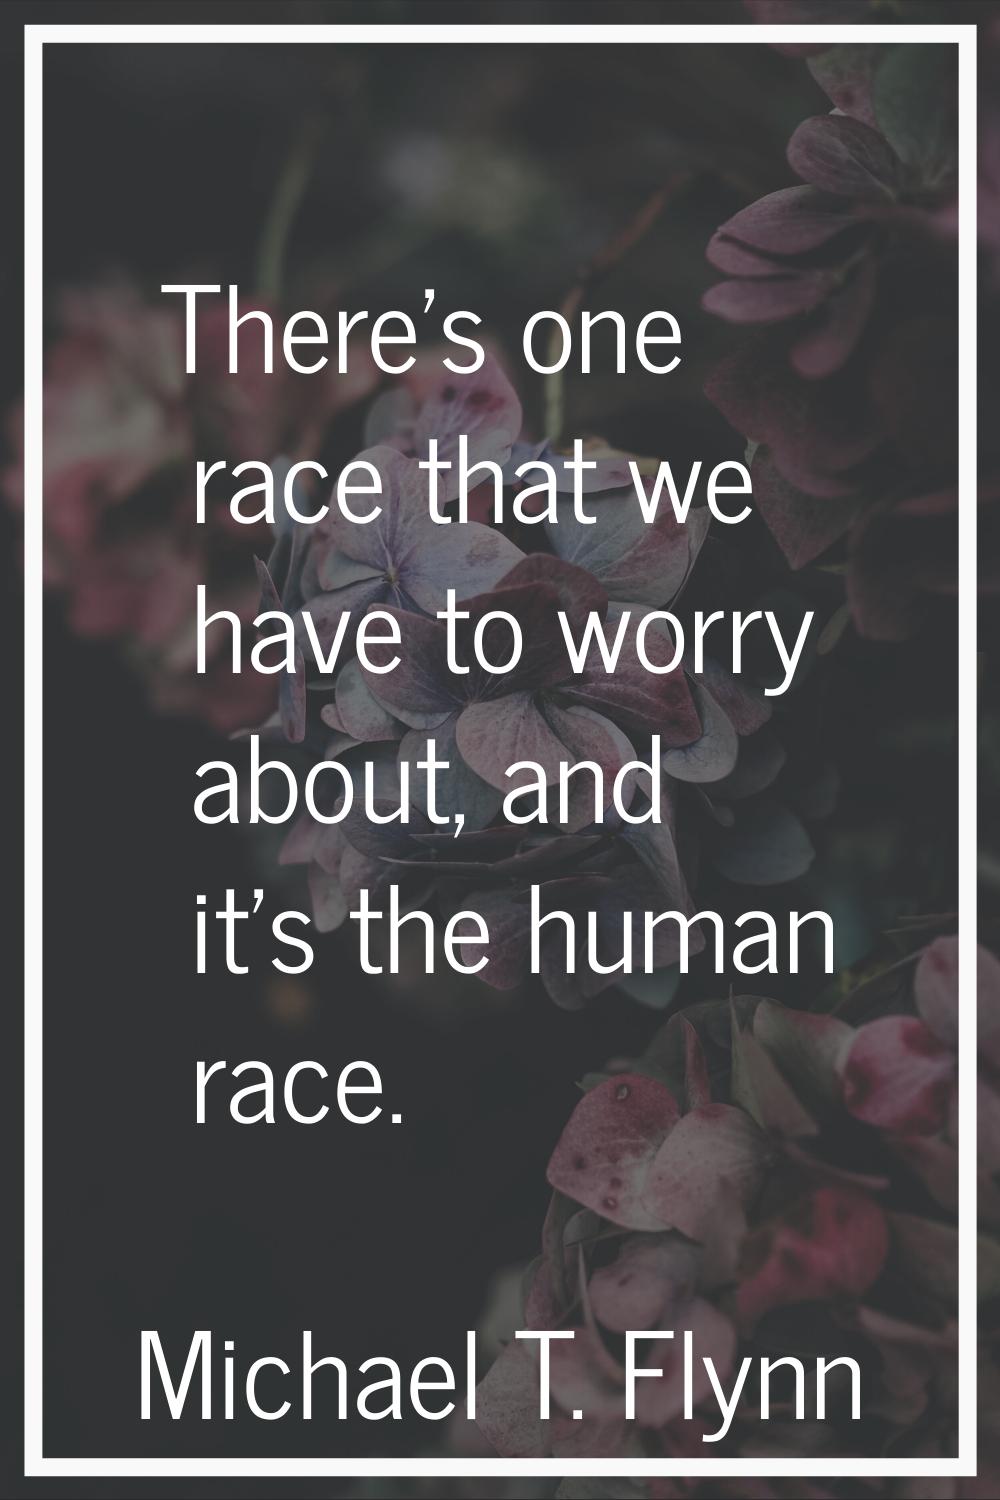 There's one race that we have to worry about, and it's the human race.